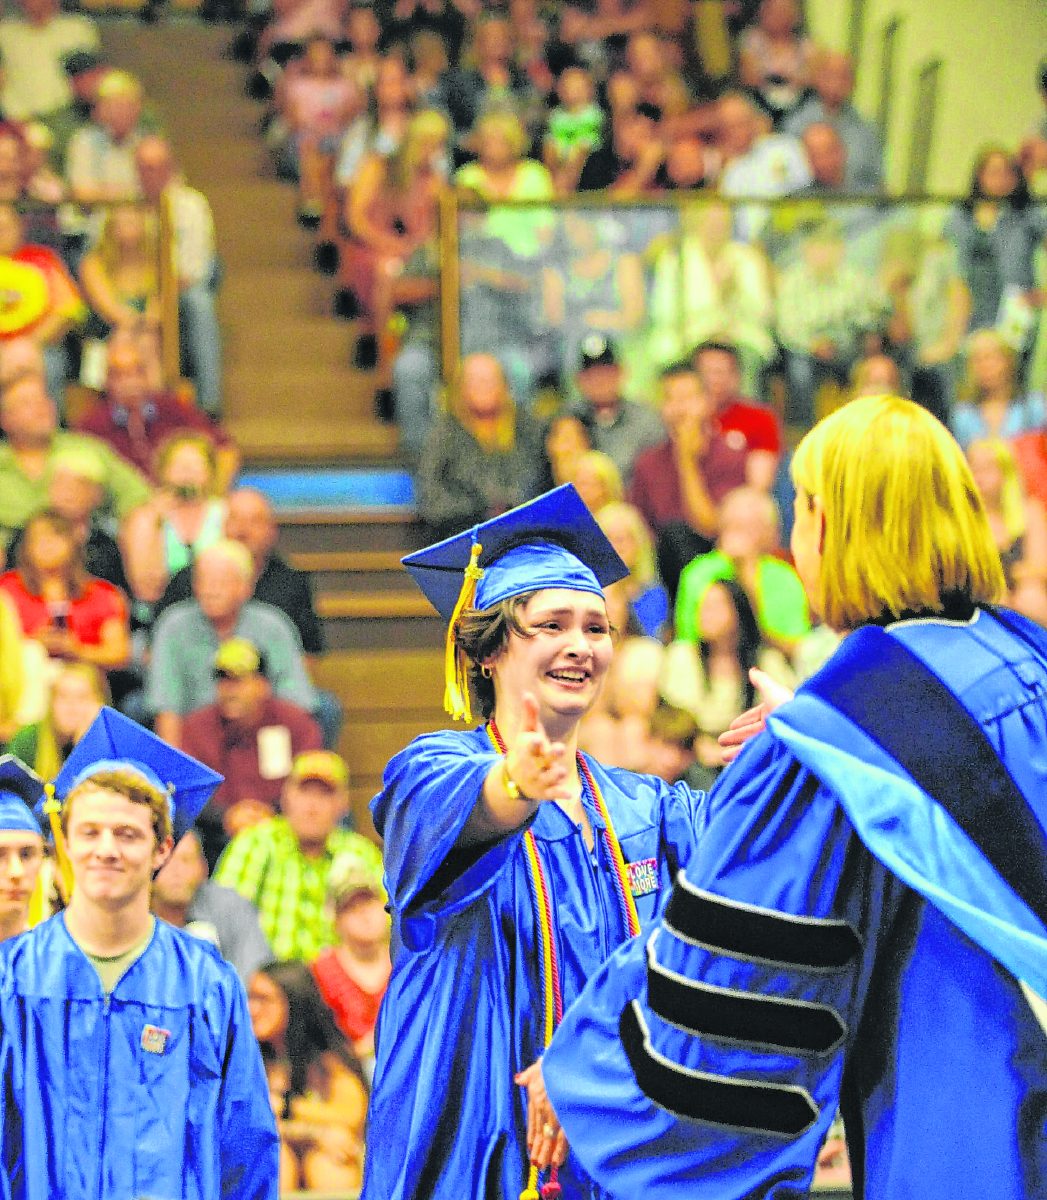 Lilee DeLoach reaches for a hug from Superintendent Laura Hammack during the Brown County High School commencement ceremony on June 7. | Suzannah Couch